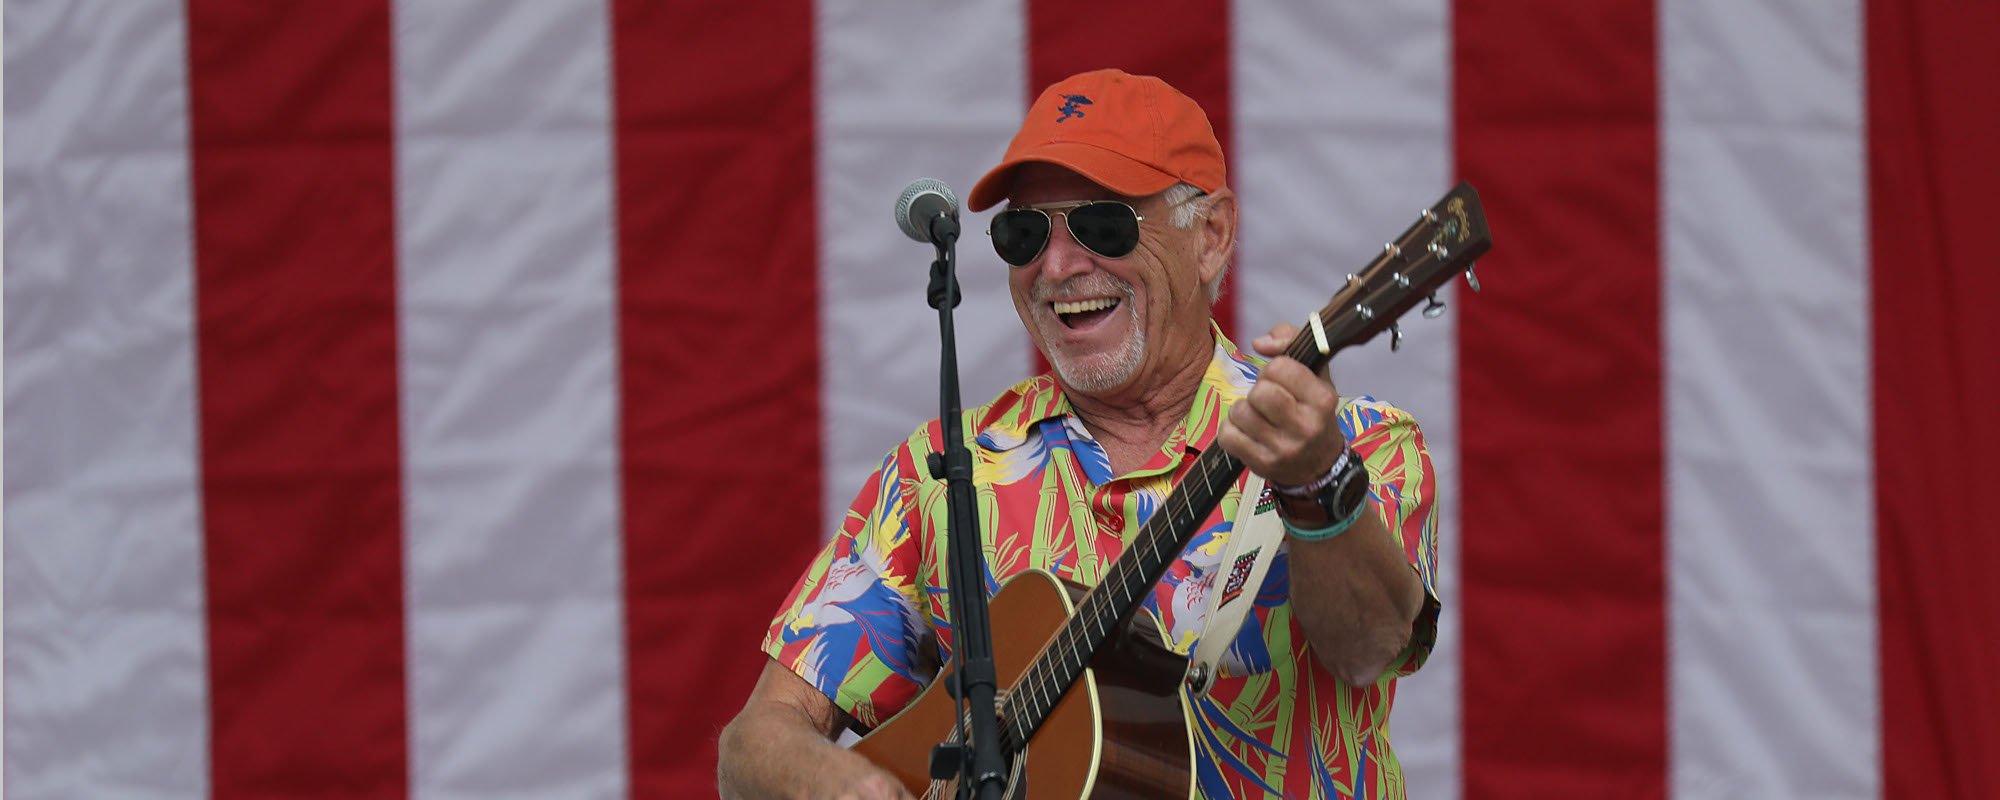 3 Songs You Didn’t Know Featured Jimmy Buffett